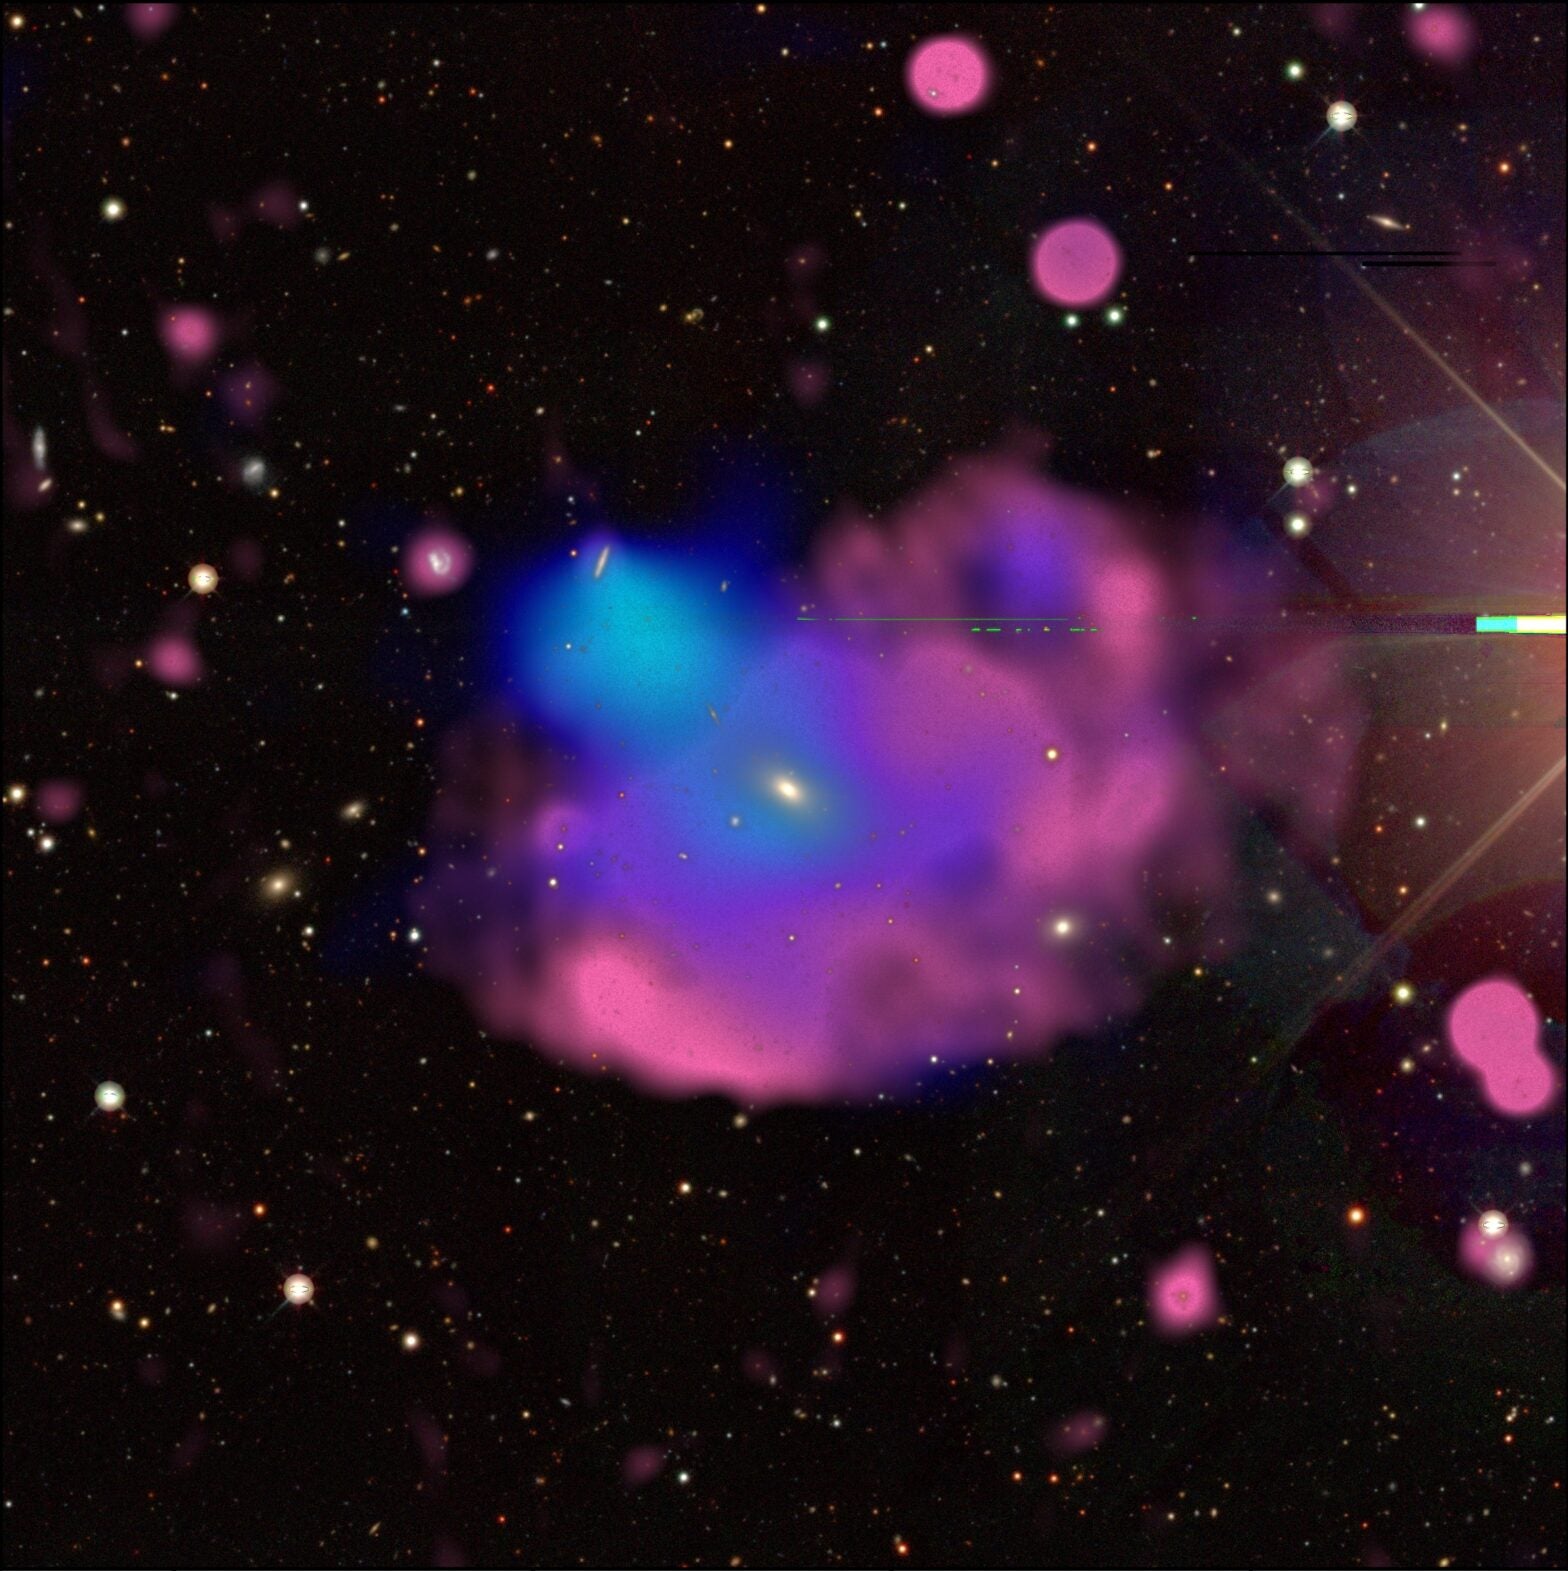 A mosaic of the Cloverleaf radio emission in multiple wavelengths: visible light observations from the DESI (Dark Energy Spectroscopic Instrument) Legacy Survey in white and yellow; X-rays from XMM-Newton in blue; and radio from ASKAP (the Australian Square Kilometer Array Pathfinder) in red. Credit: Xiaoyuan Zhang & Matthias Kluge (MPE), Baerbel Korbalski (CSIRO).